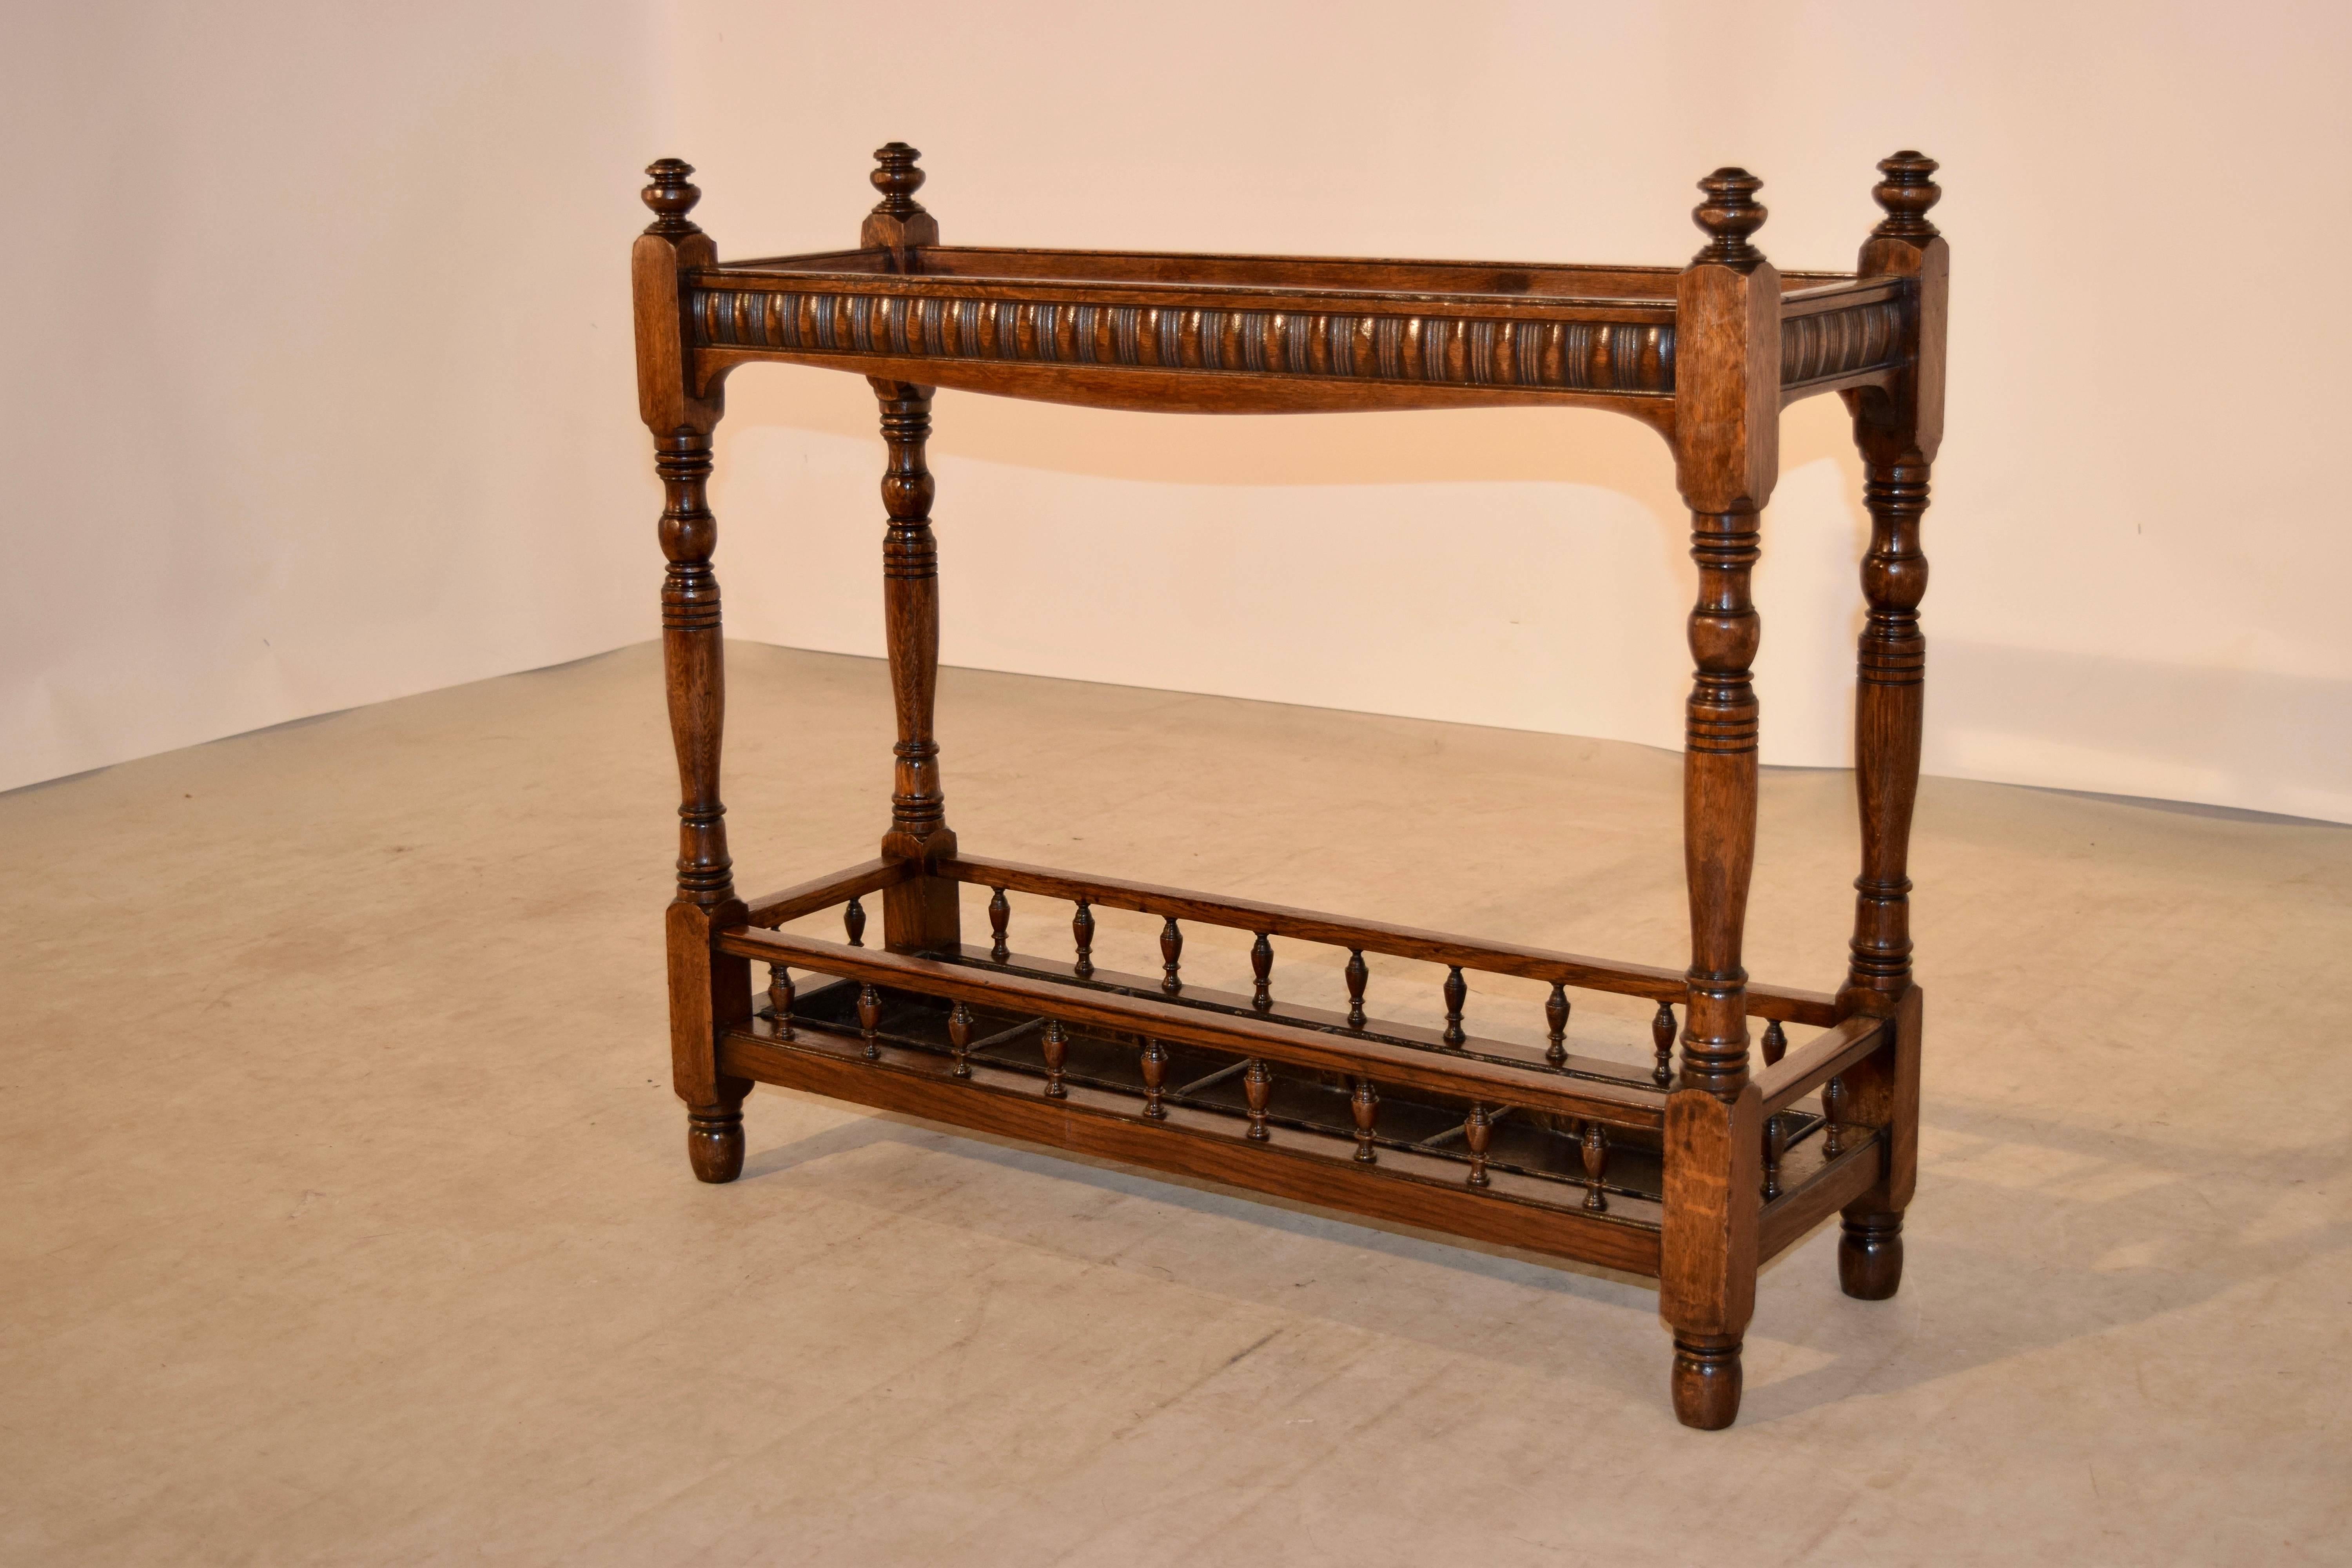 19th century English oak umbrella and cane stand with finials, following down to hand-turned legs, joined at the top by hand-carved decorated rails and at the bottom by simple rails with hand-turned spindles. It retains the original painted metal